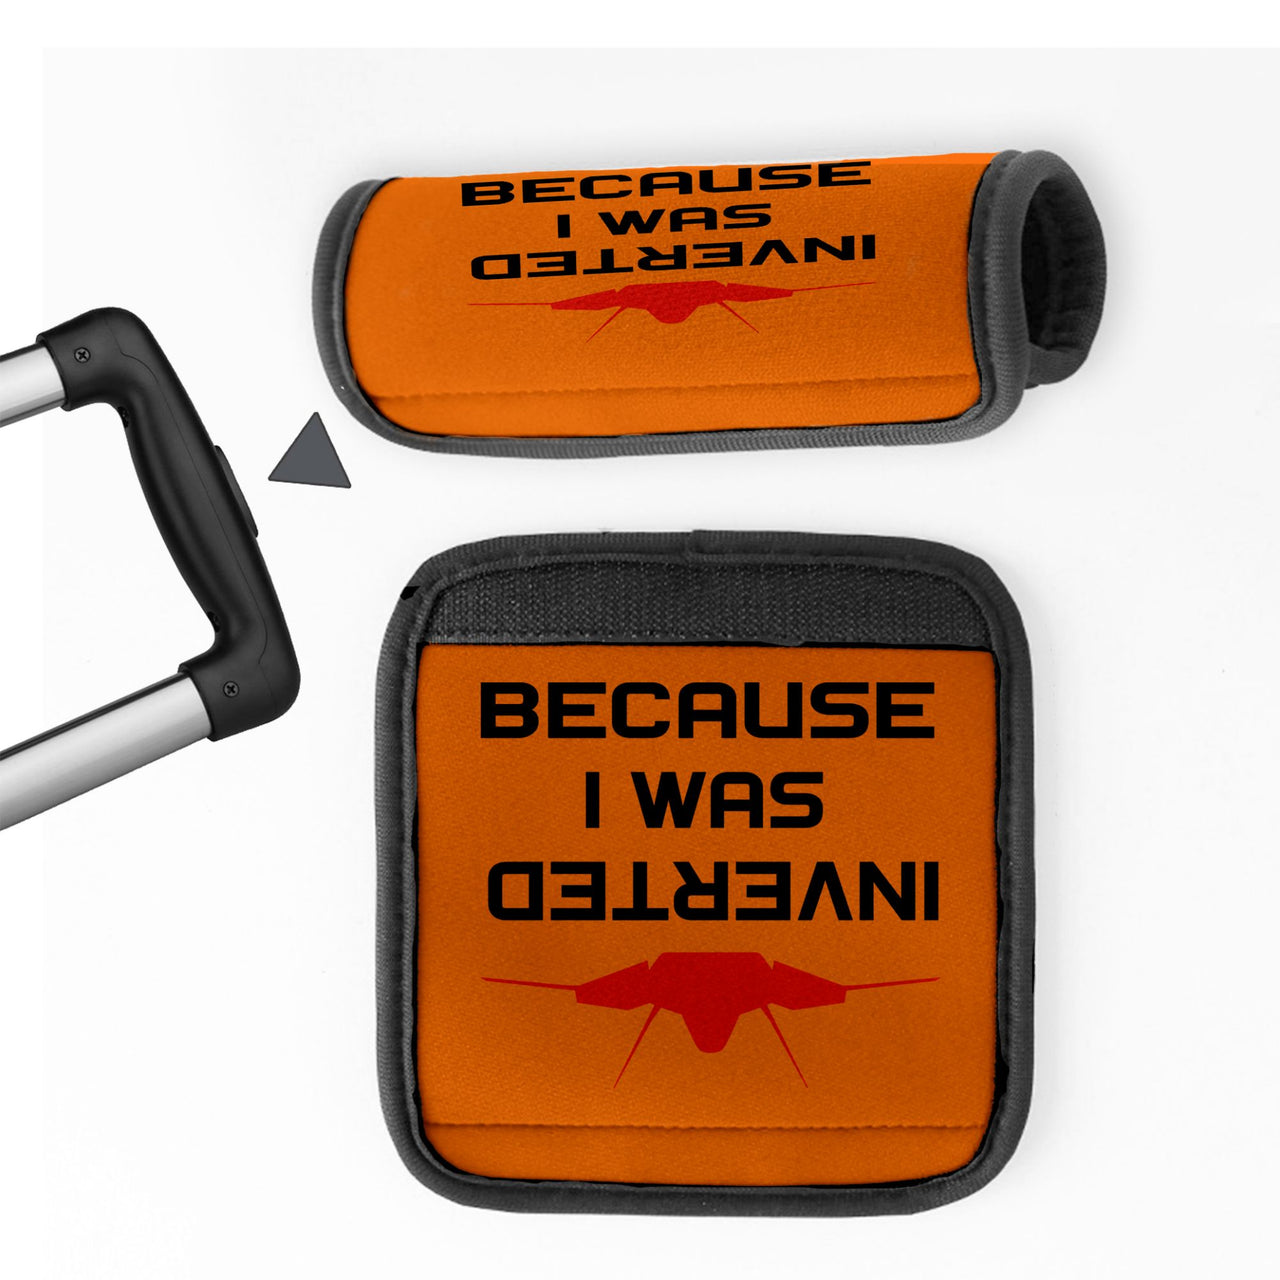 Because I was Inverted Designed Neoprene Luggage Handle Covers